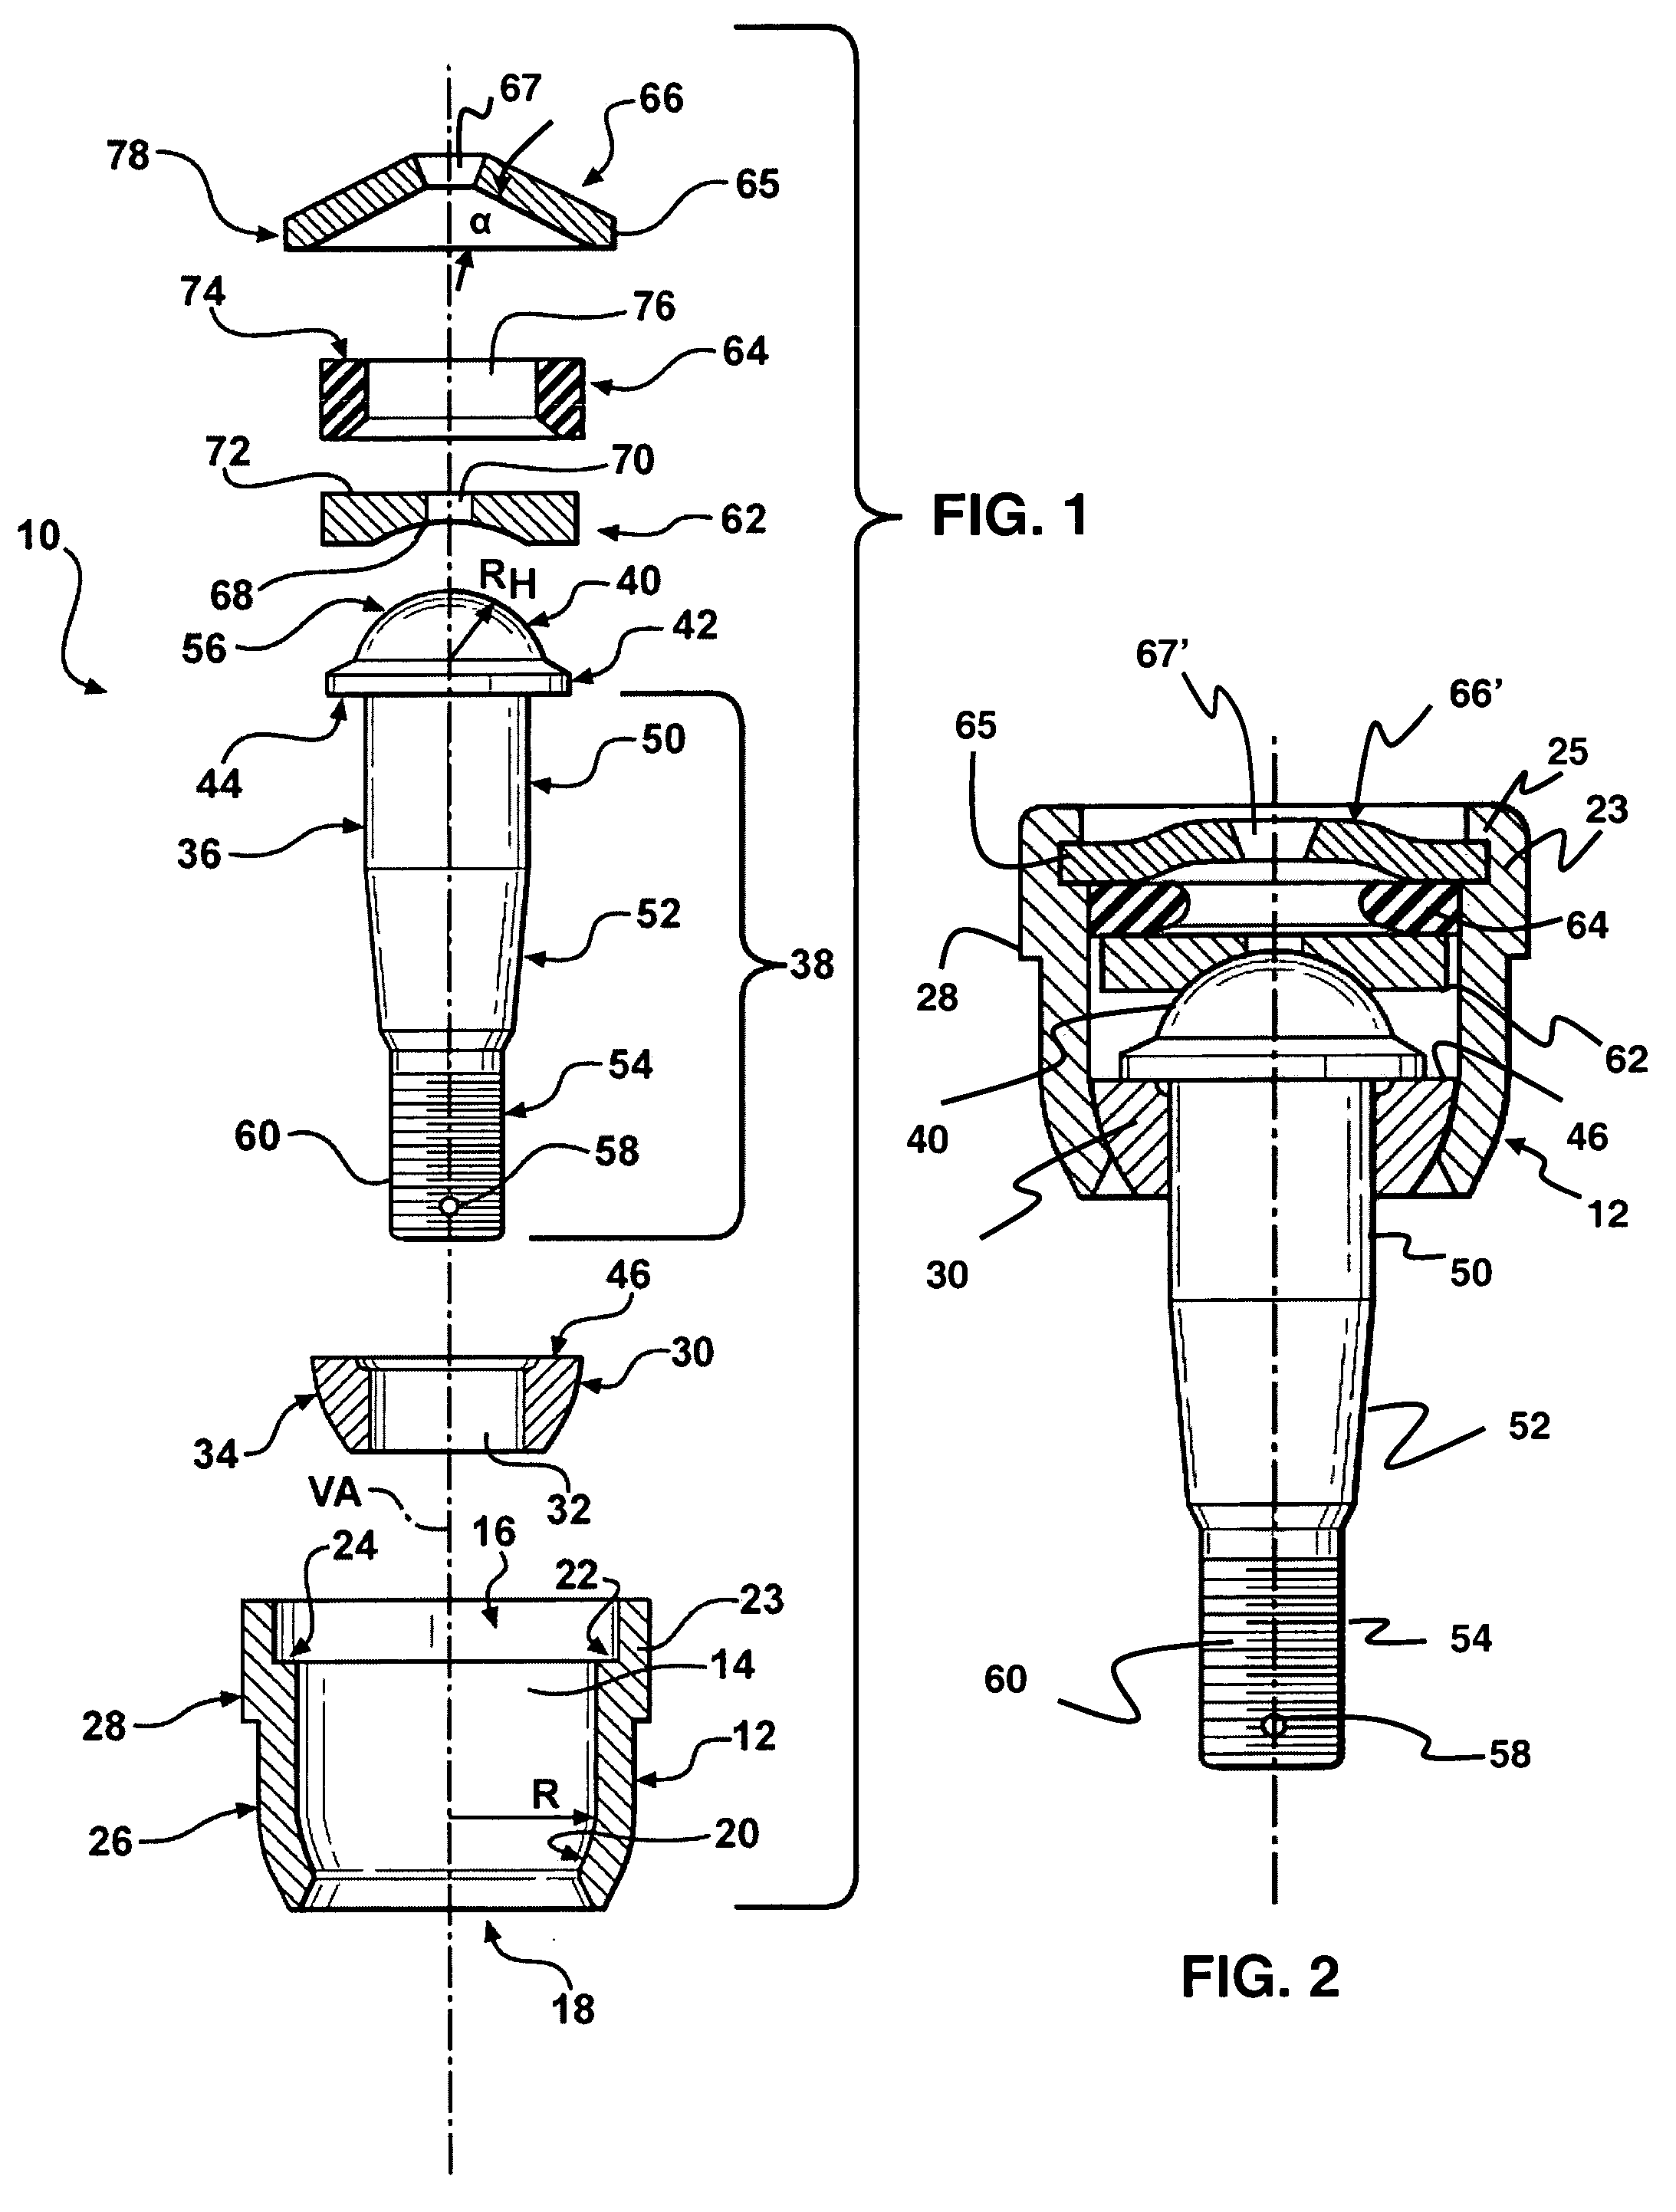 Method for clearance adjusting cover plate closure